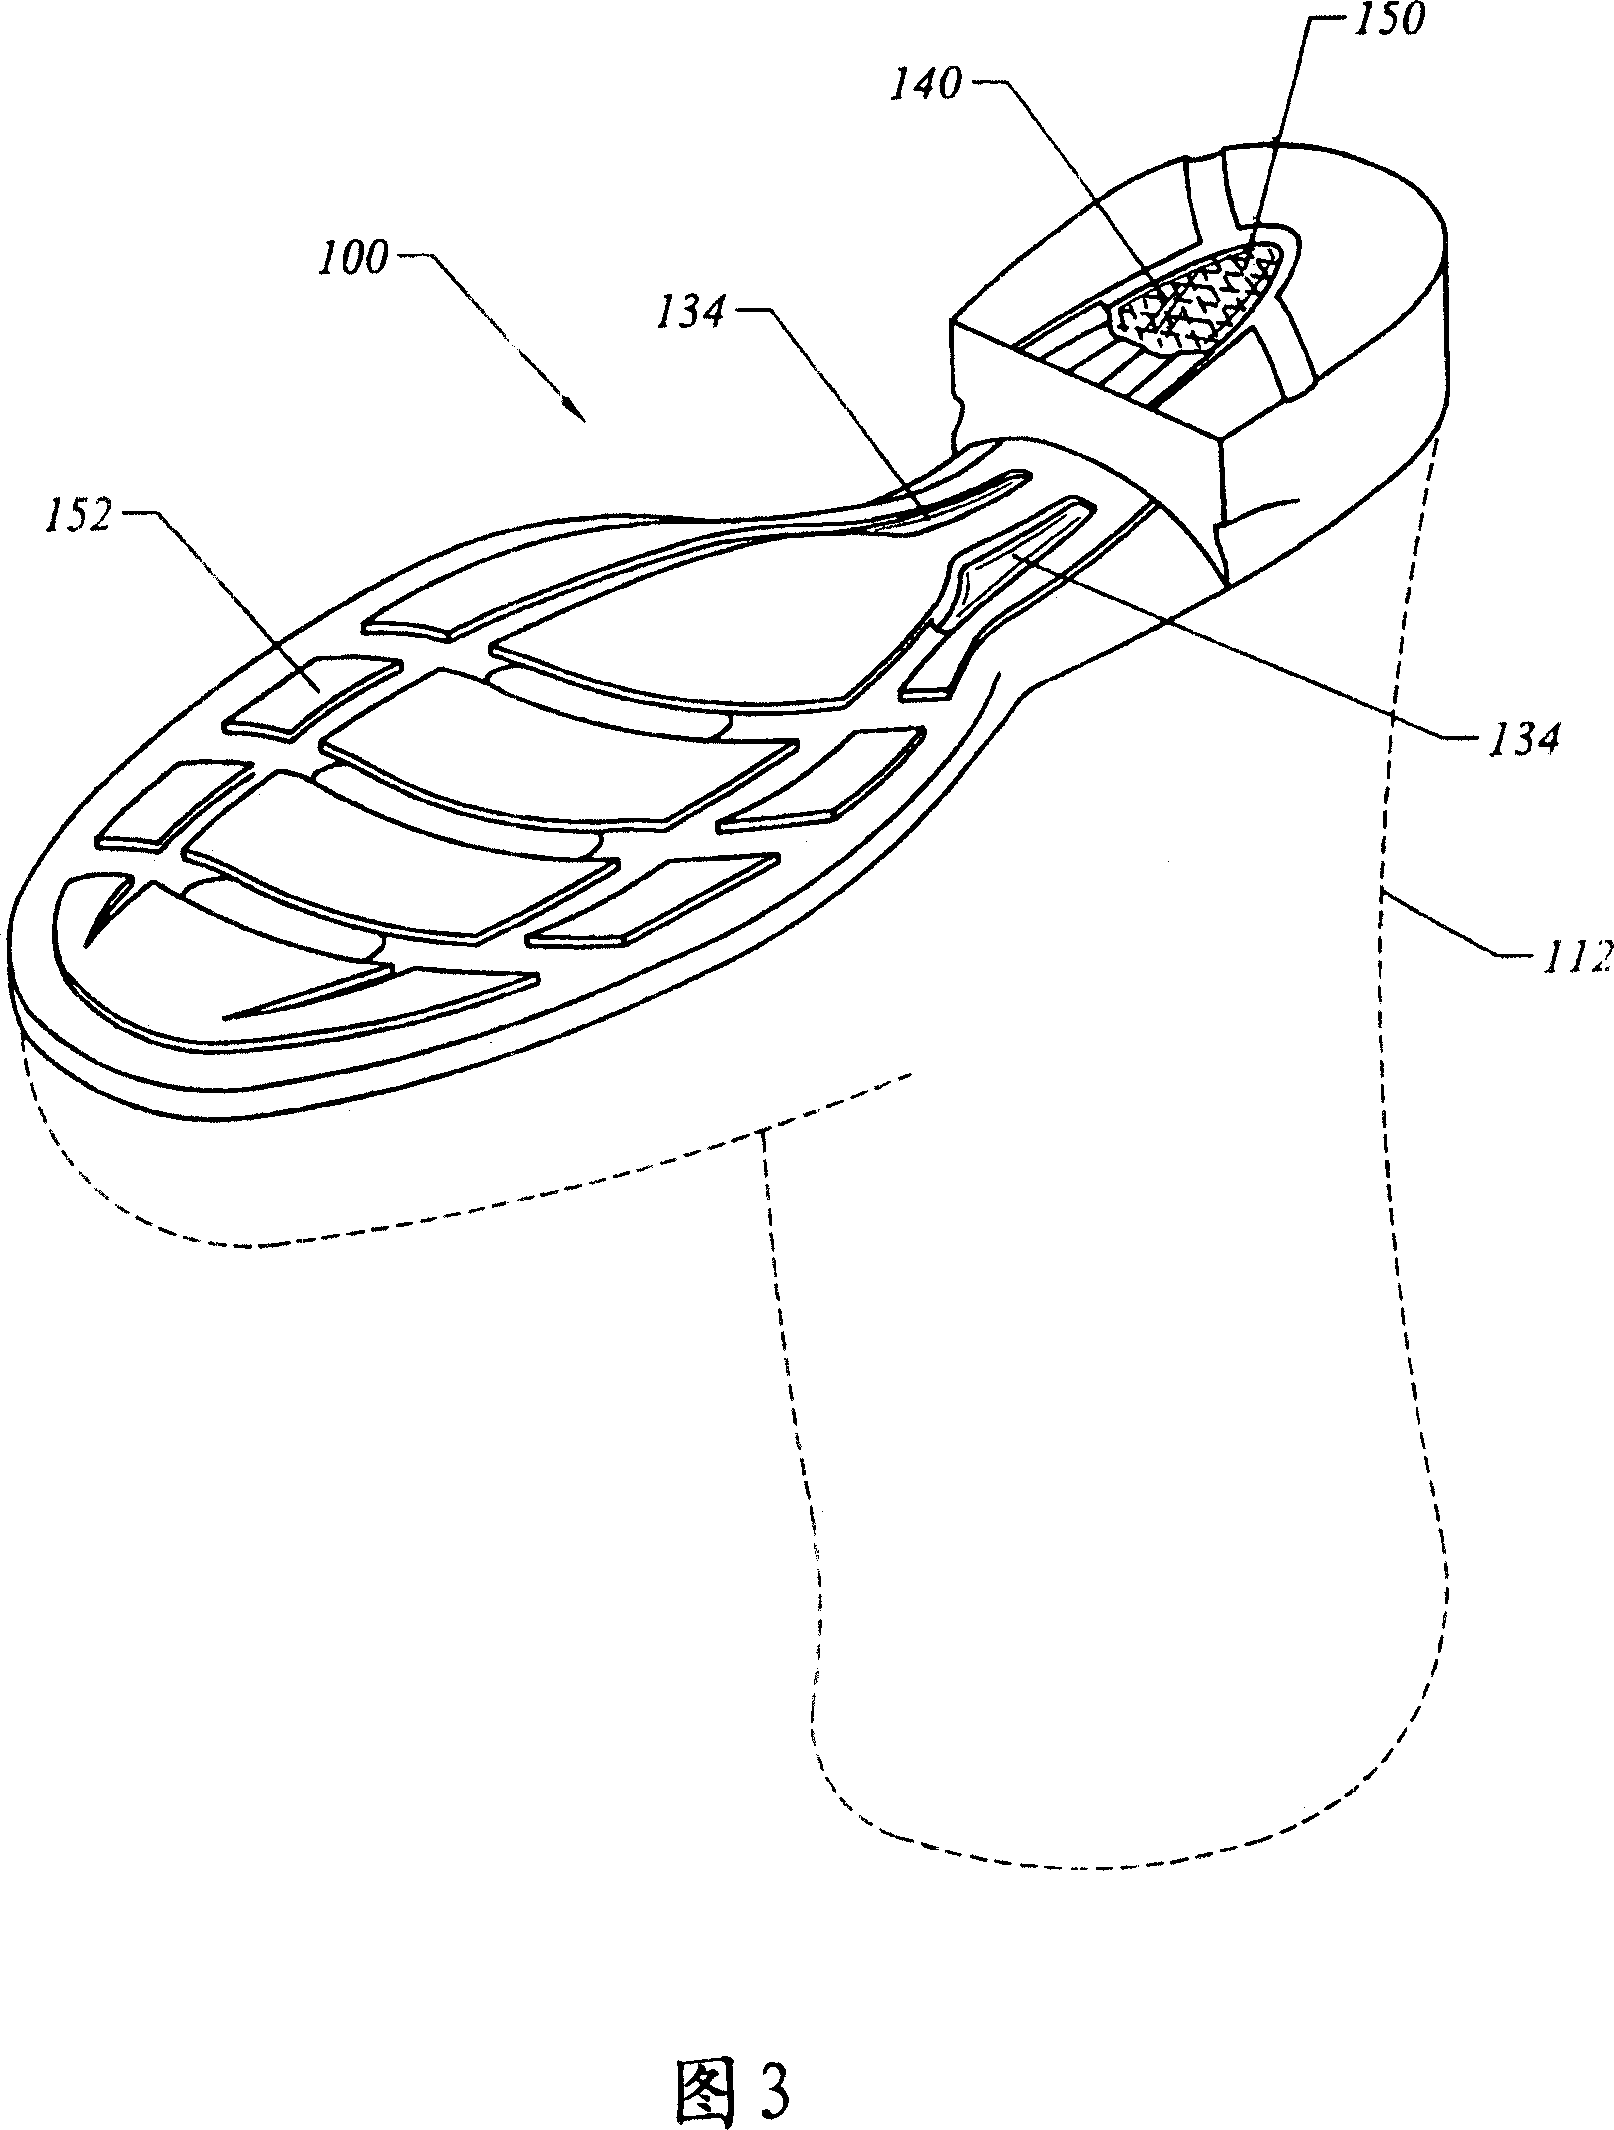 Footwear sole with forefoot stabilizer, ribbed shank, and layered heel cushioning